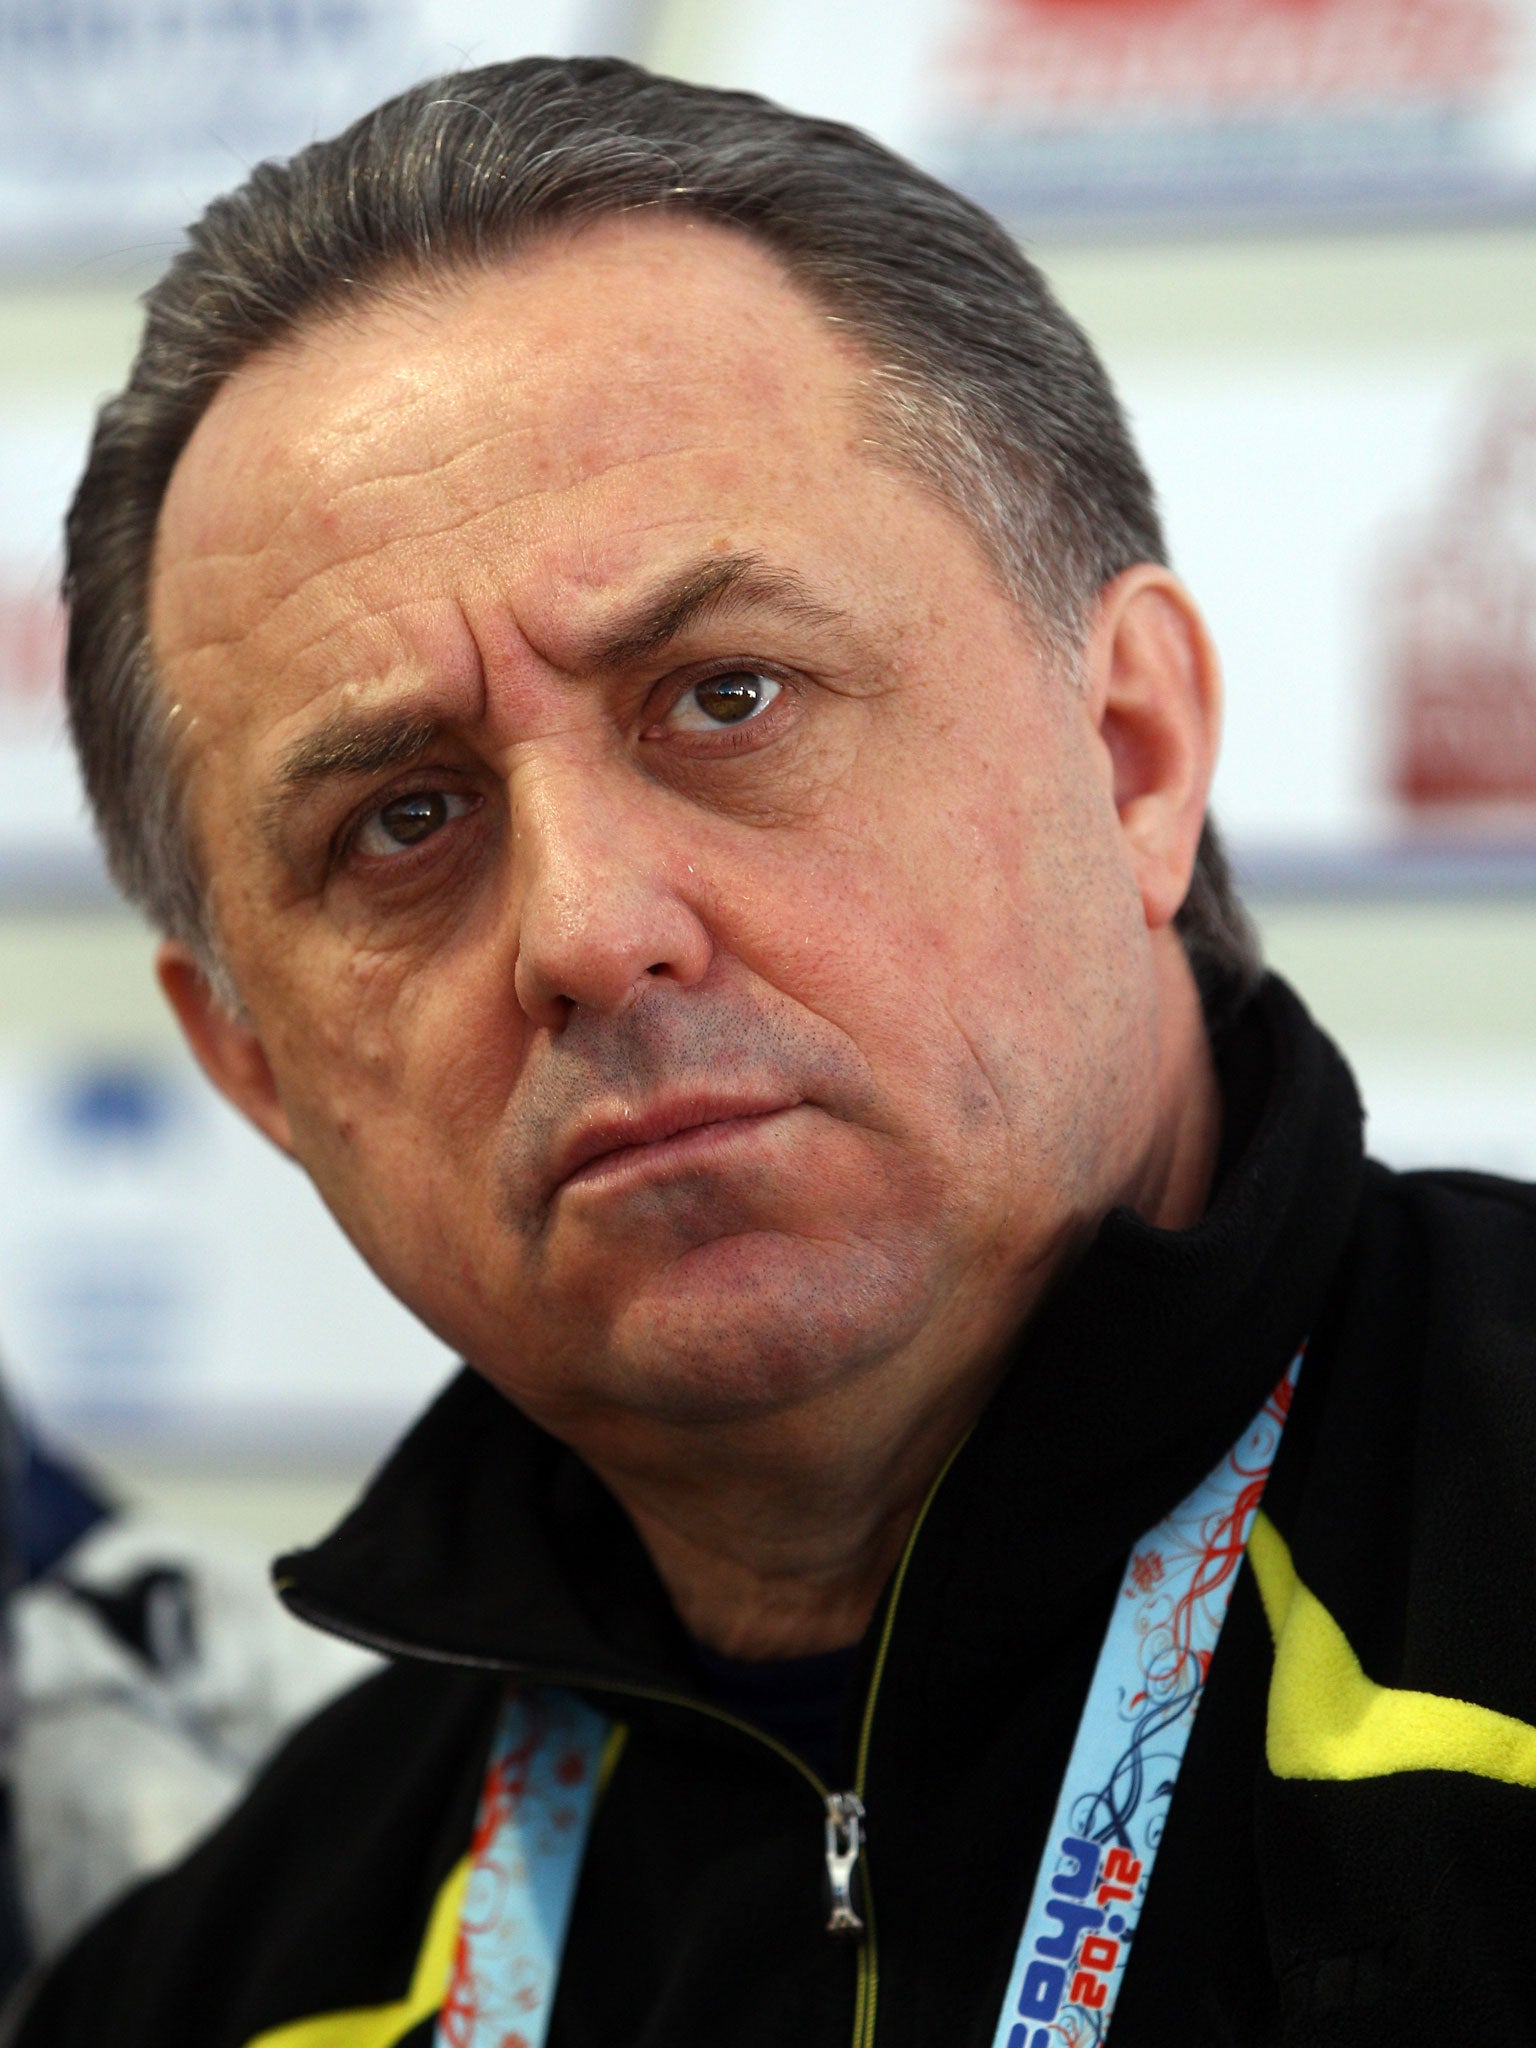 Tit for tat: Vitaly Mutko has made doping counter-claims